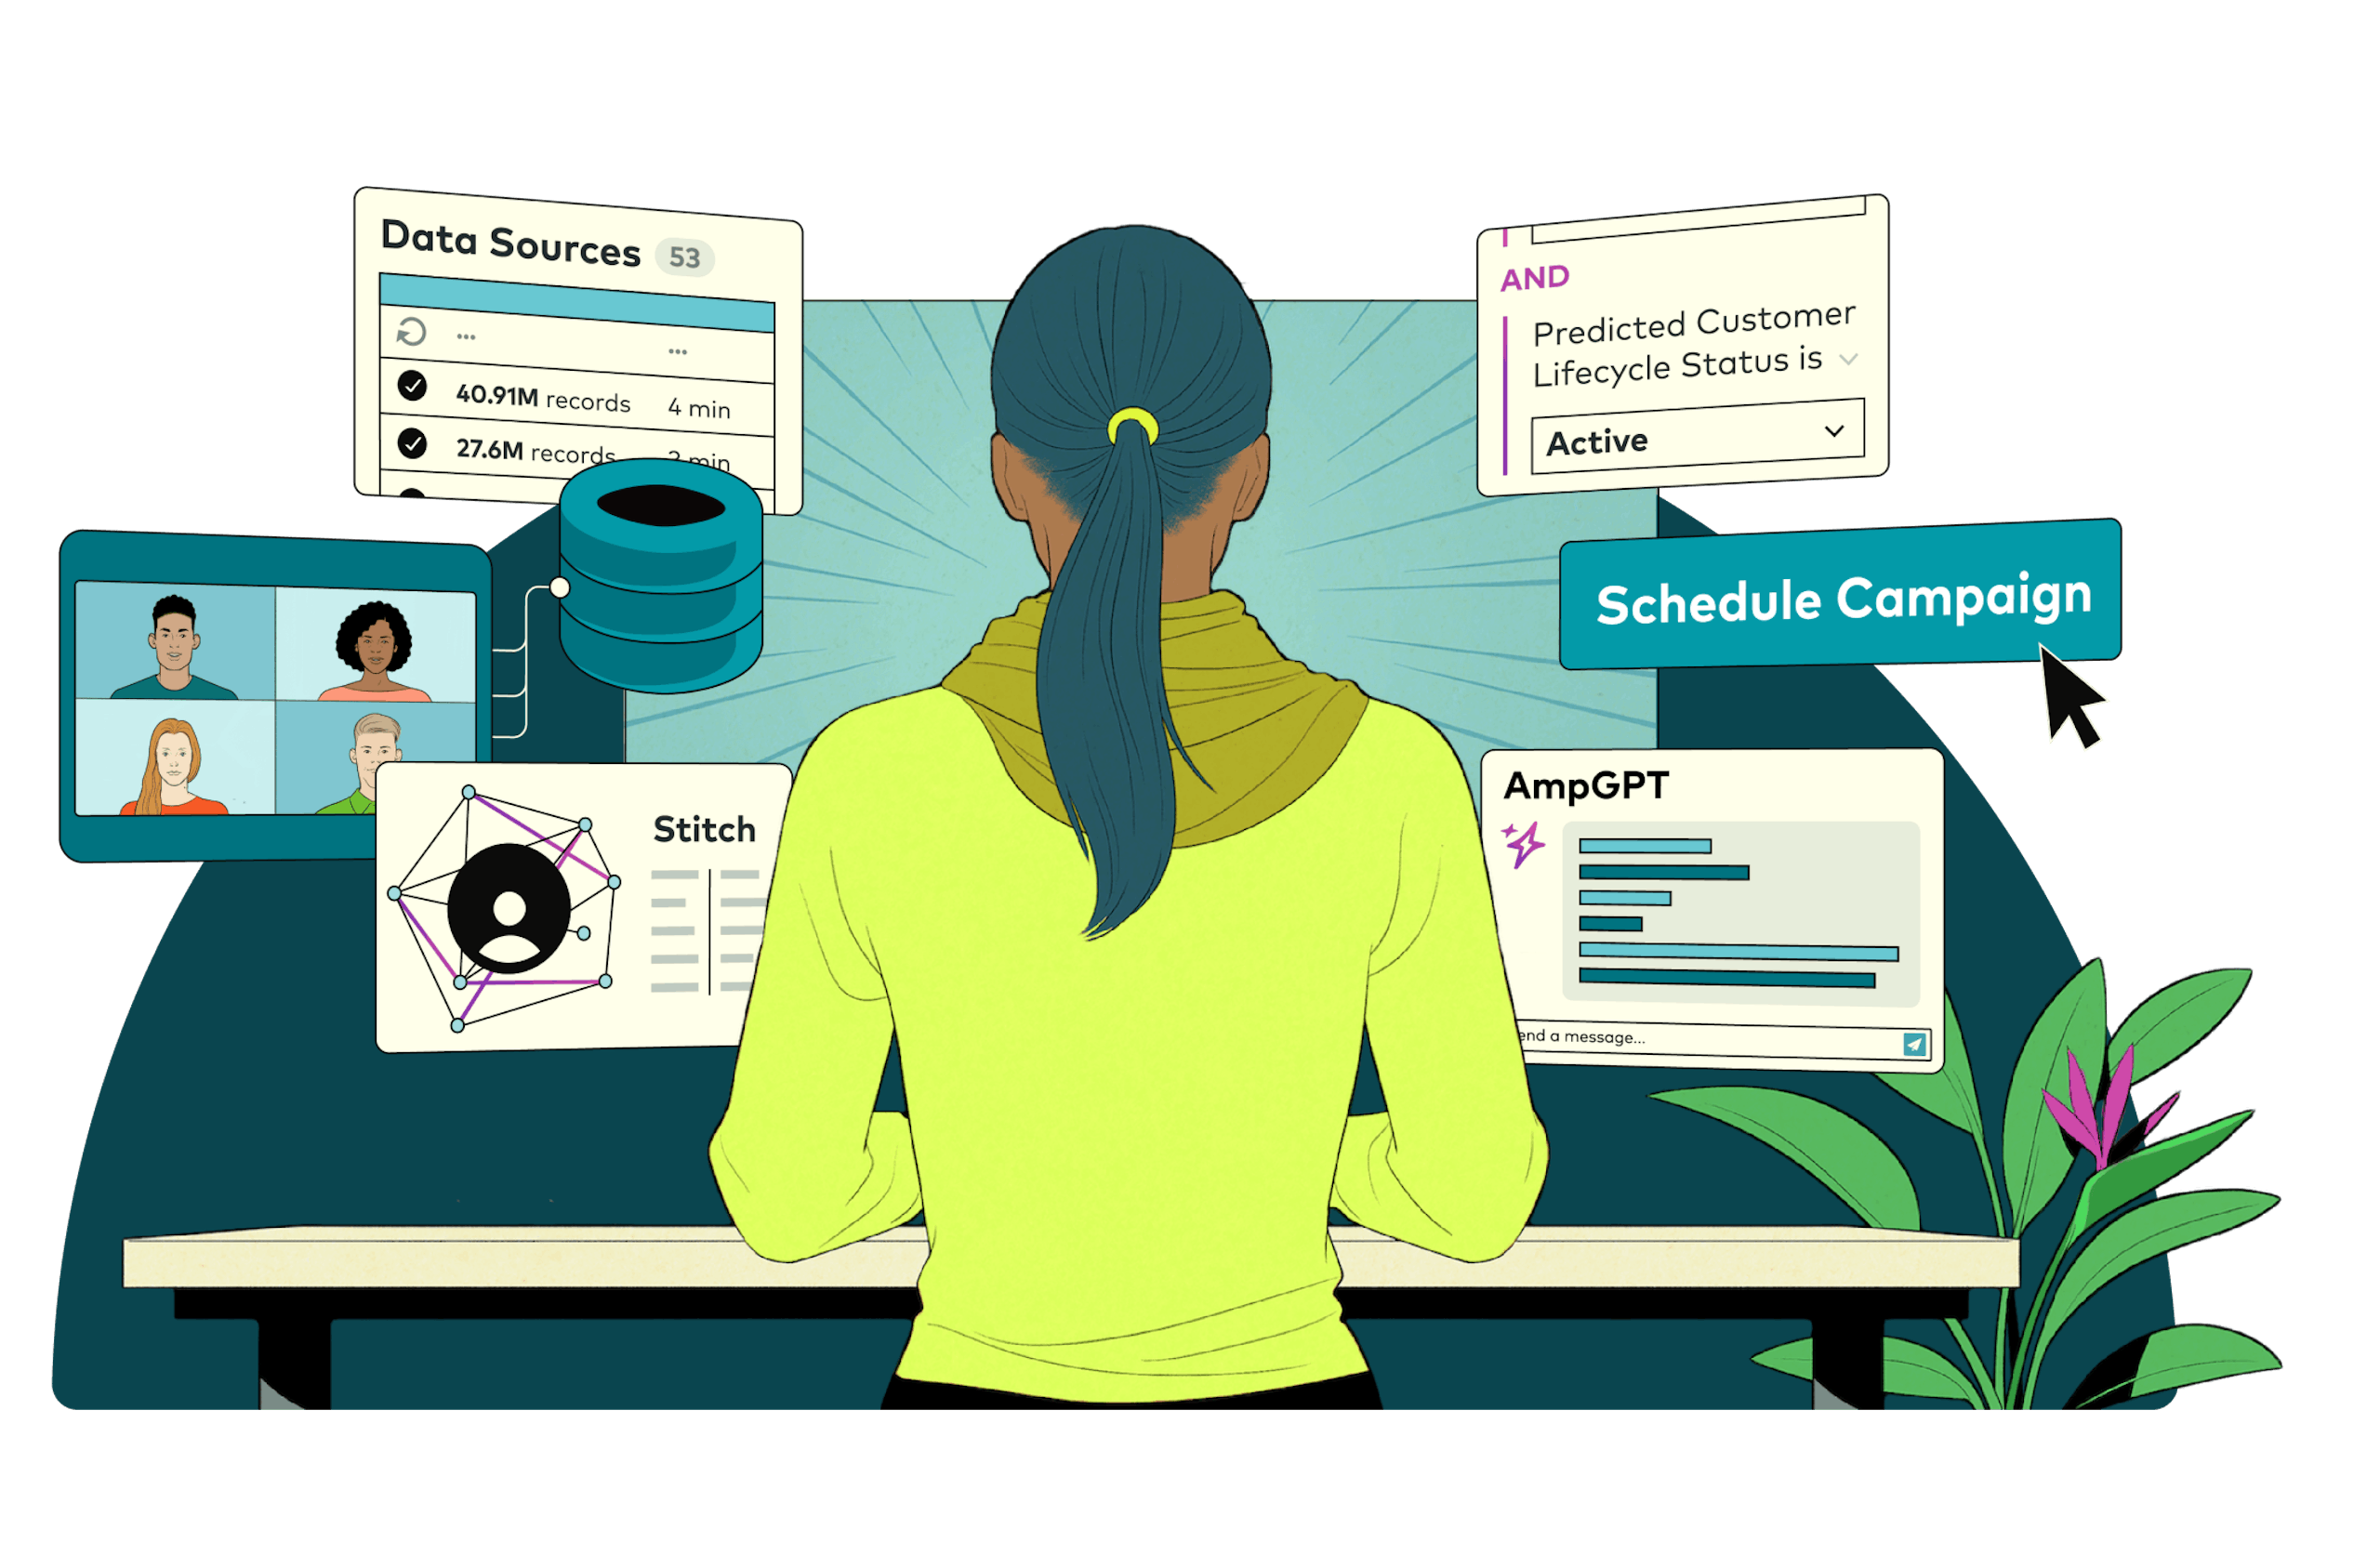 Illustration of woman at a work desk with simulated CDP product screens and elements around her.  